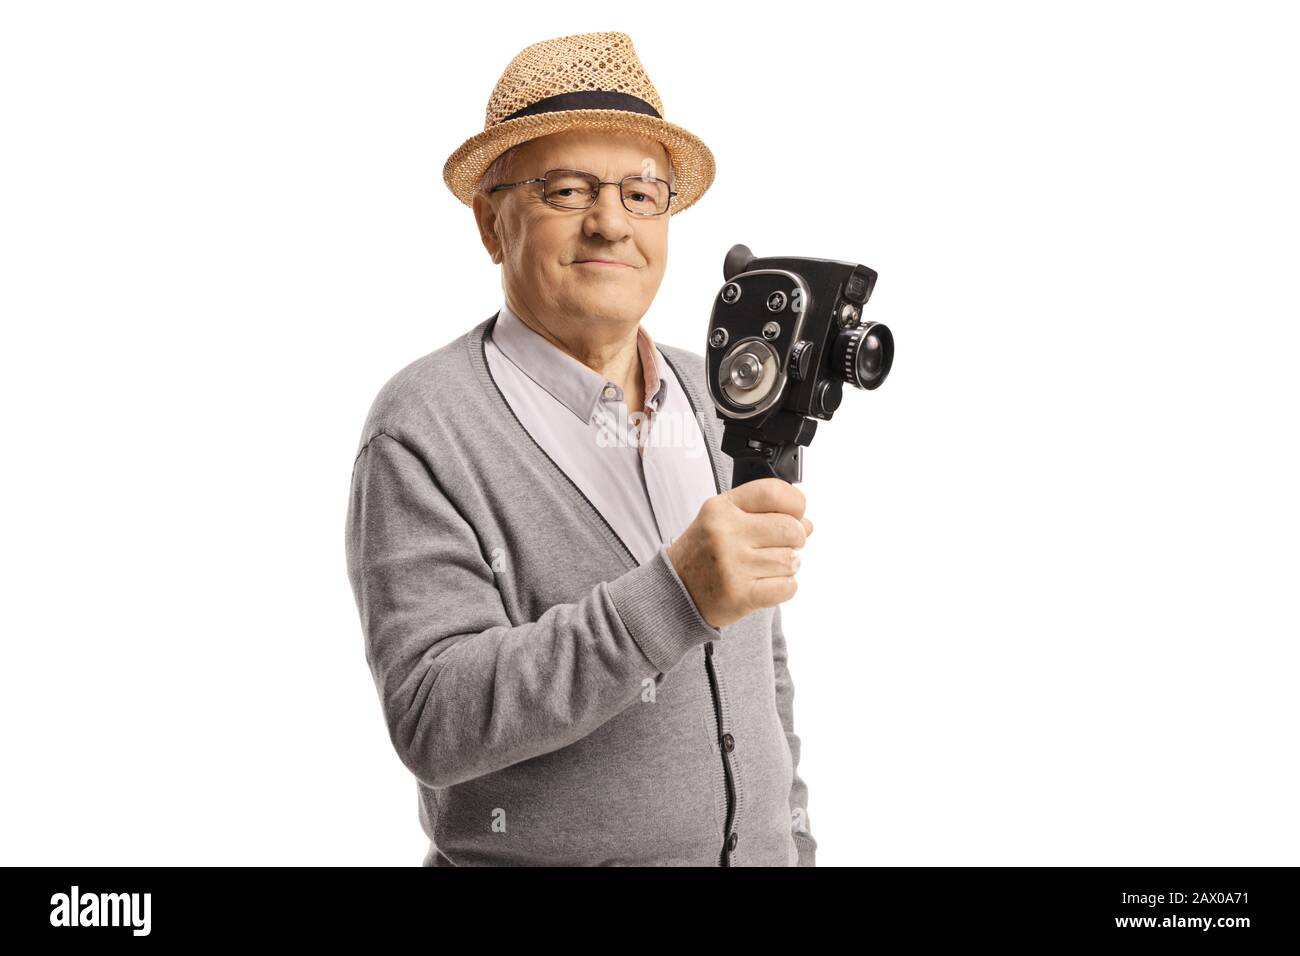 Mature gentleman holding an 8mm vintage recording camera isolated on white background Stock Photo